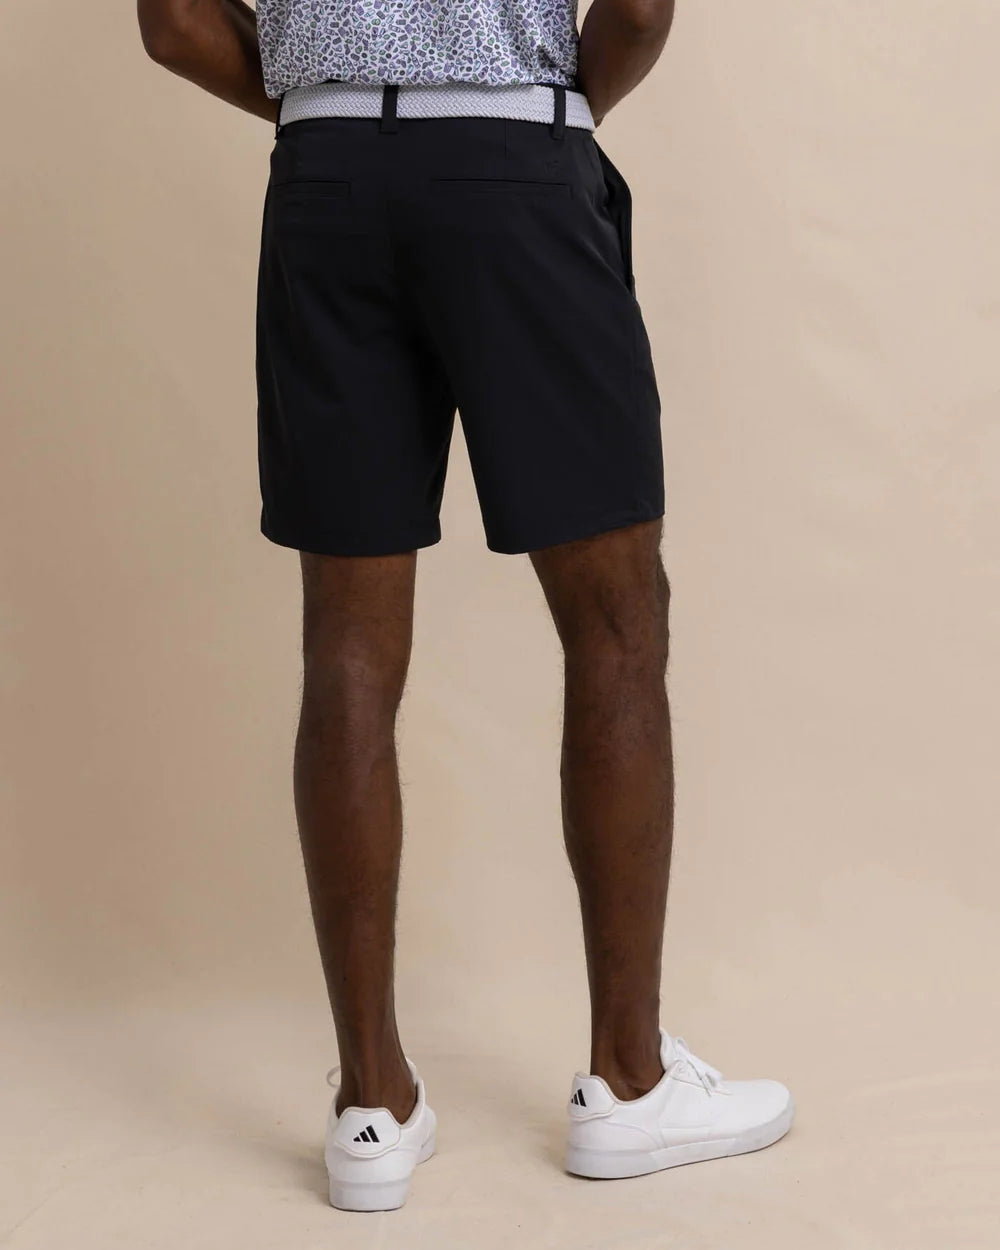 Back view of Southern Tide's brrr°®-die 8" Performance Short in the color Caviar Black